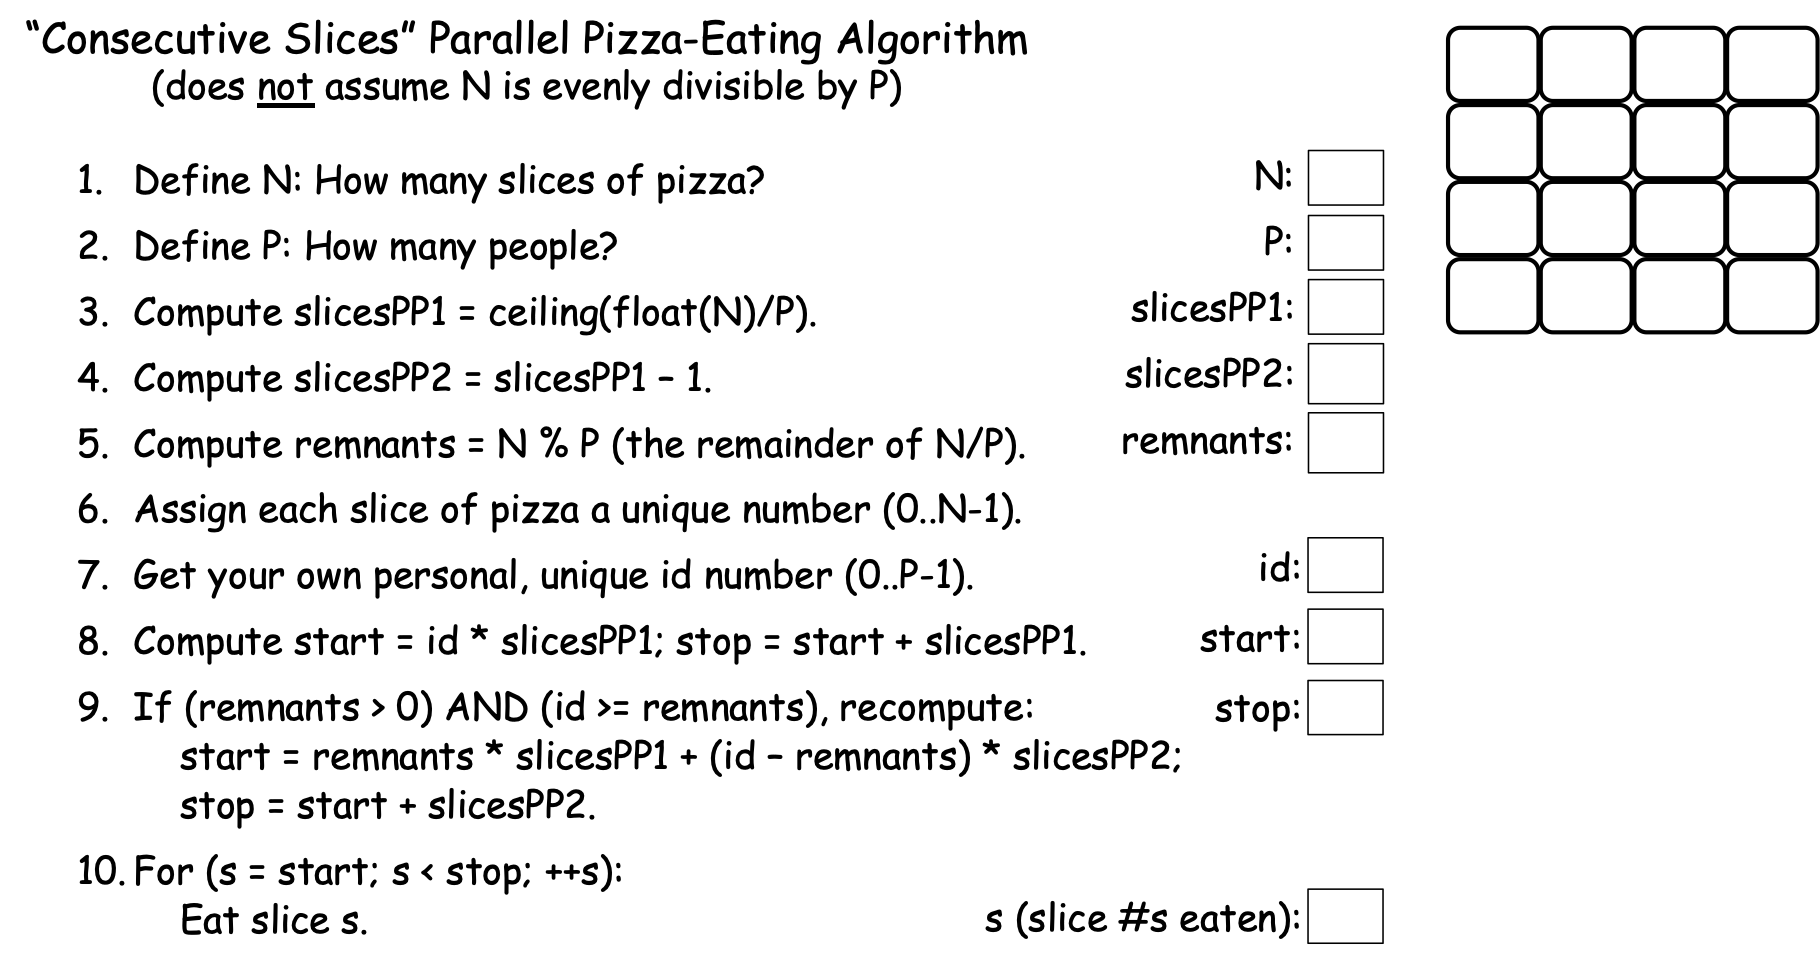 ../_images/0-21.PizzaAlgorithm2a.png